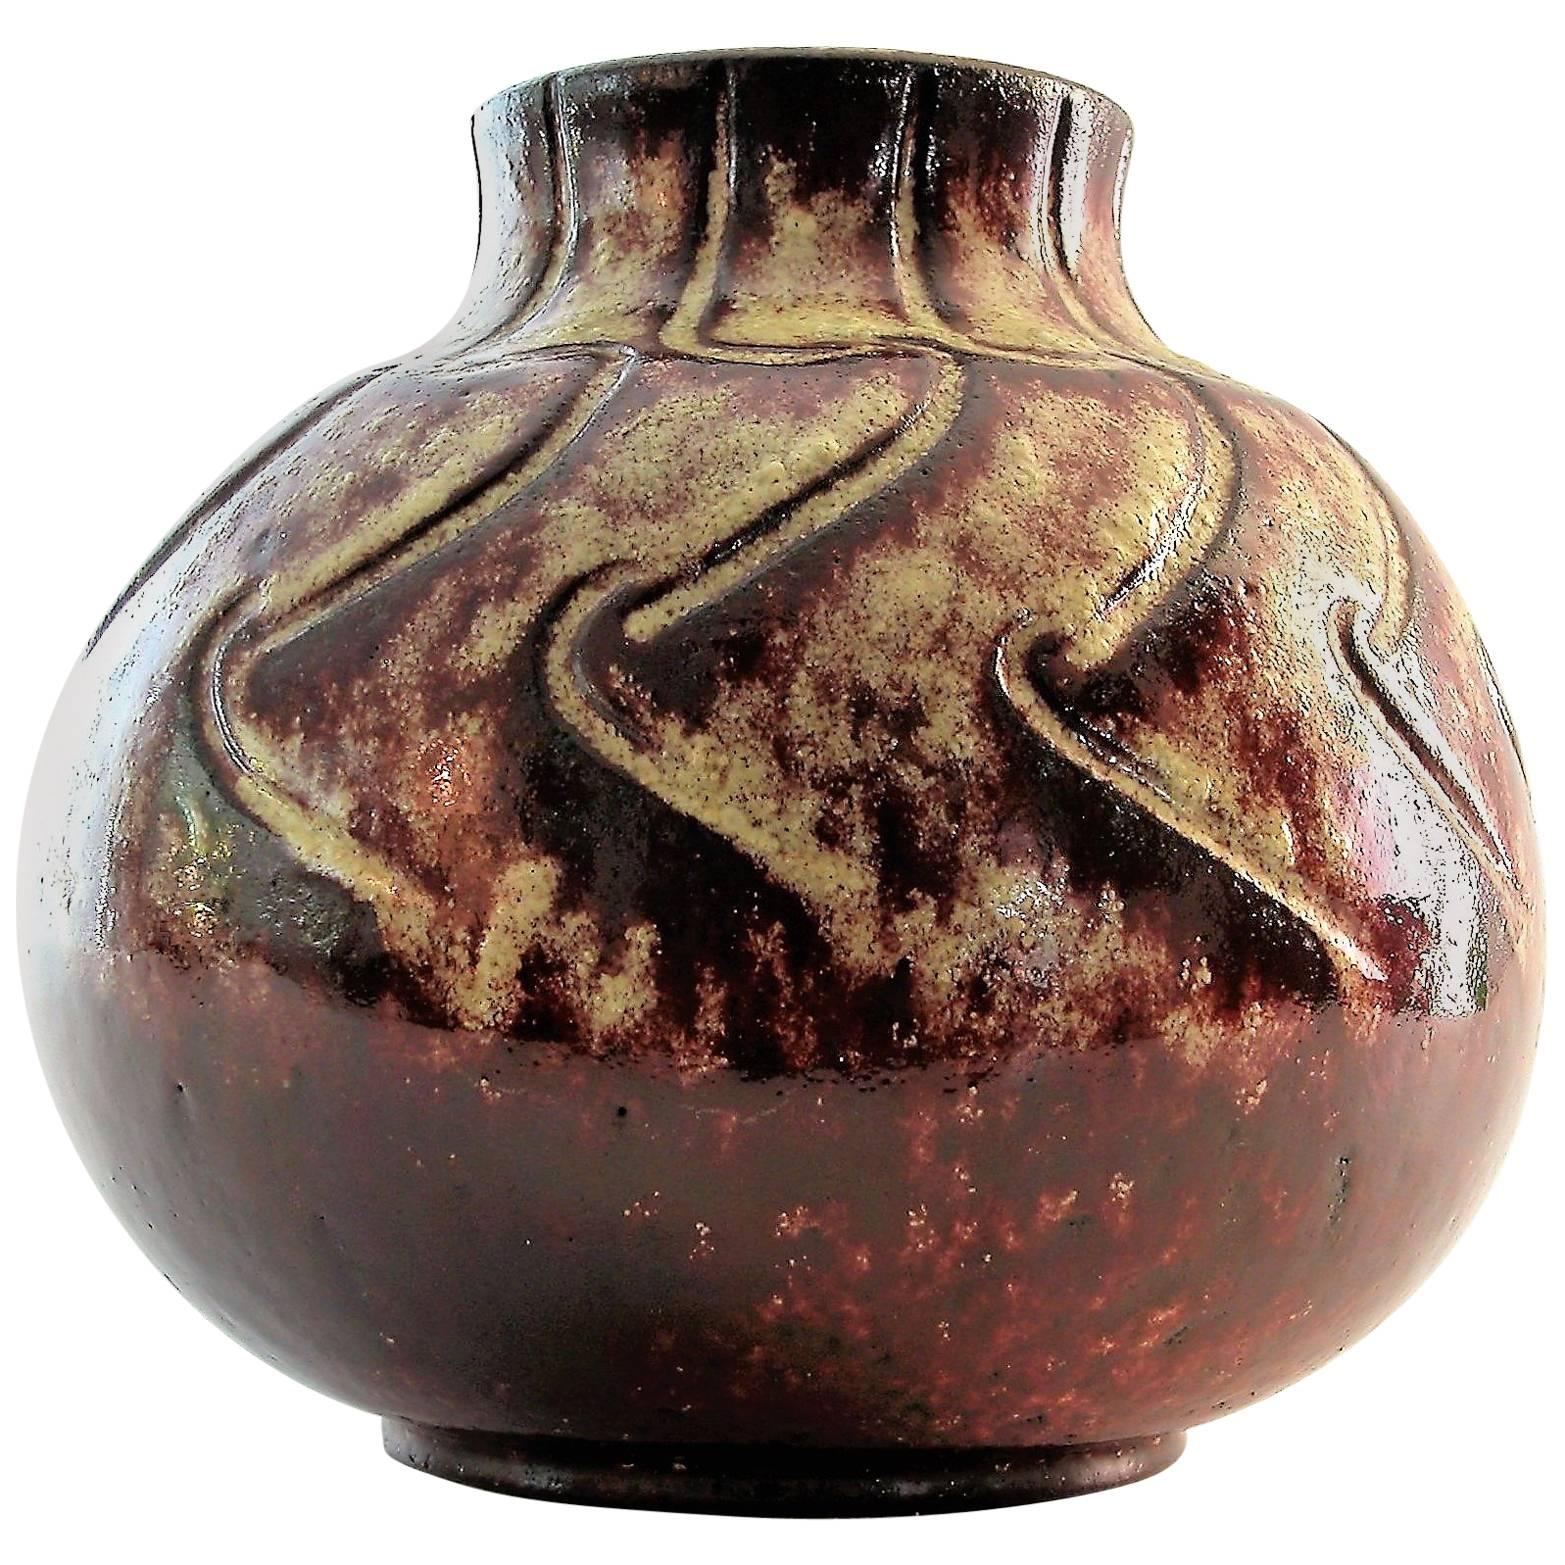 Rare Monogram RG Ceramic Vase, Raphaël Giarusso or Giarosso, for Accolay, Signed For Sale